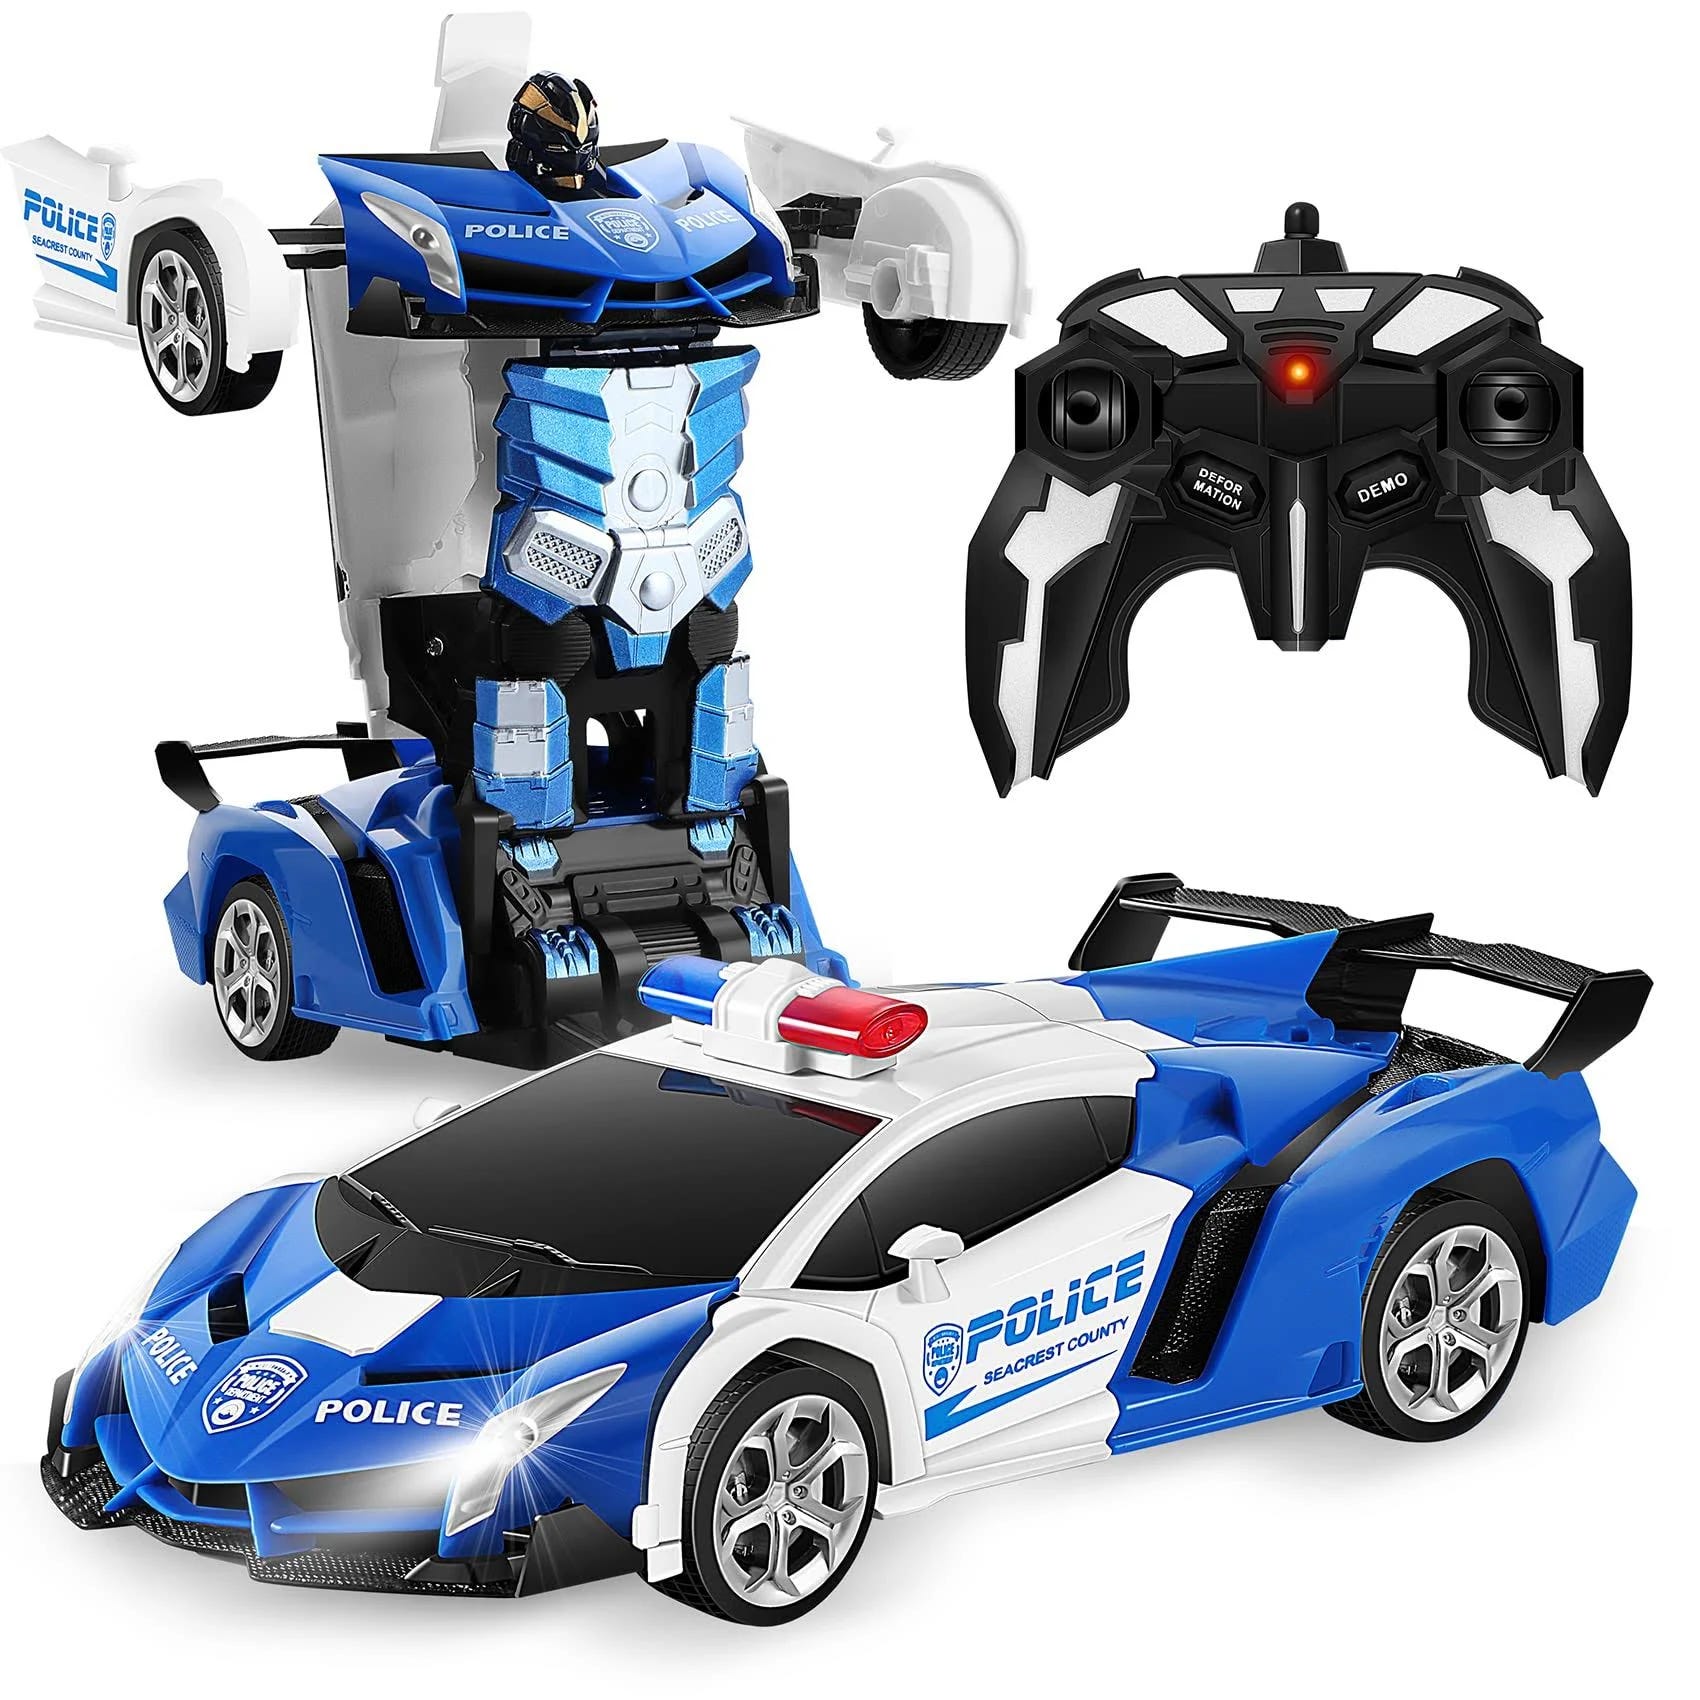 Transformable Xenon-style Car Robot Toy with 360-degree Turning Capability and Remote Control | Image